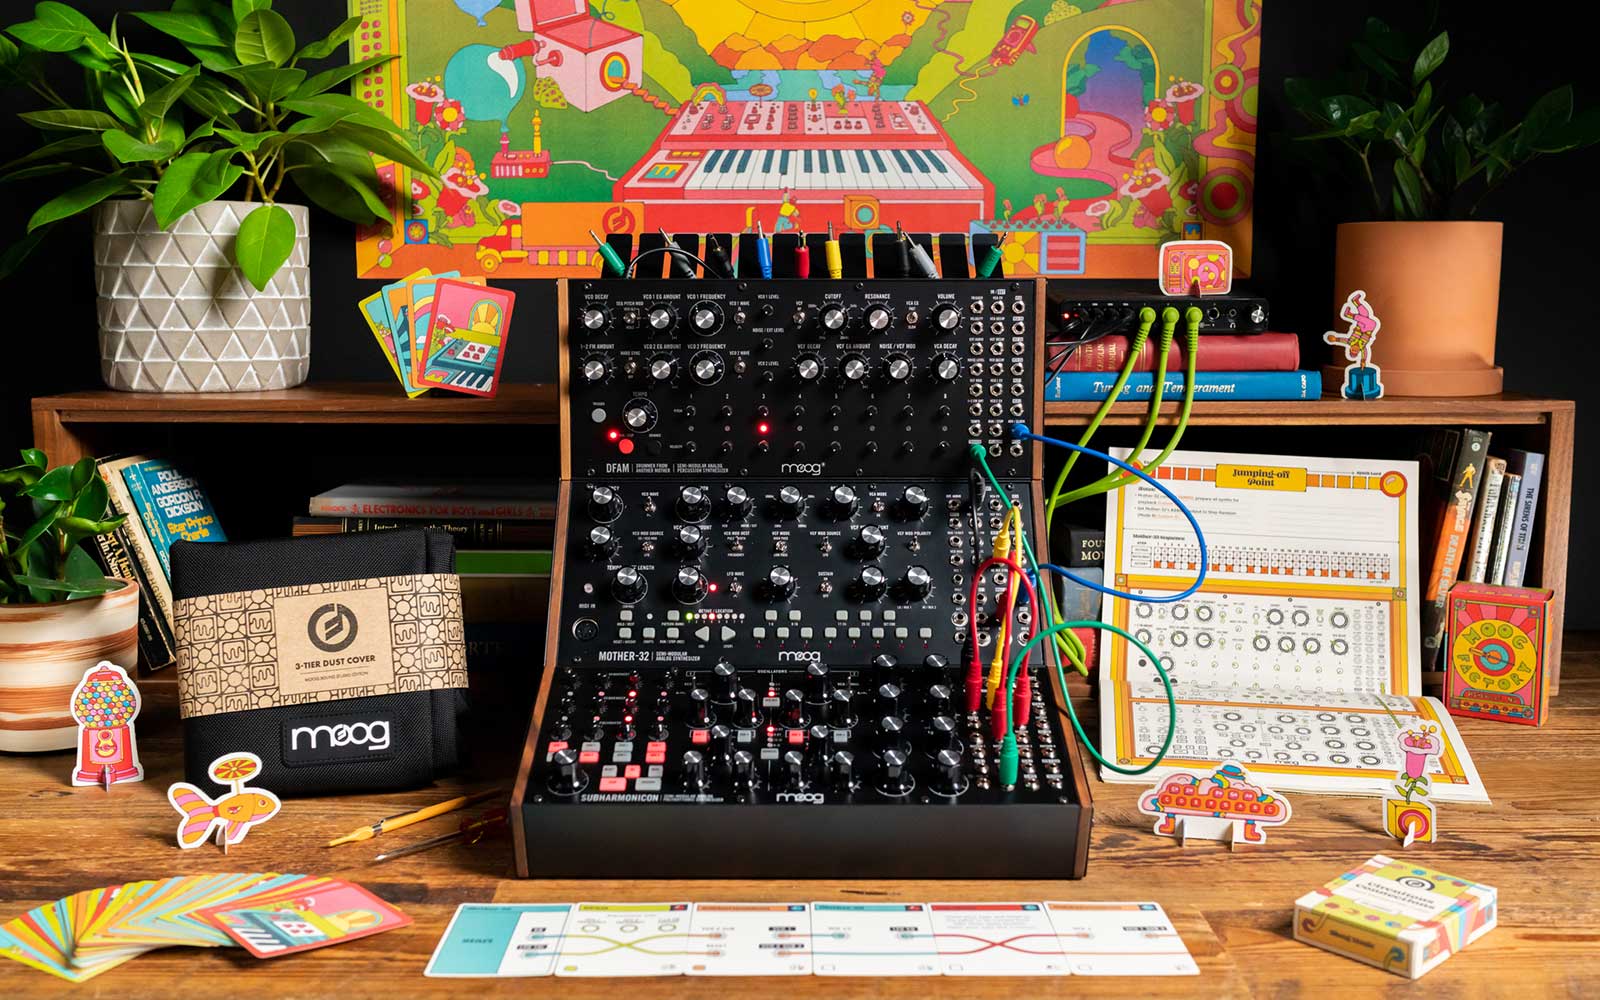 Moog's three-synth bundle teaches patching techniques with a card game